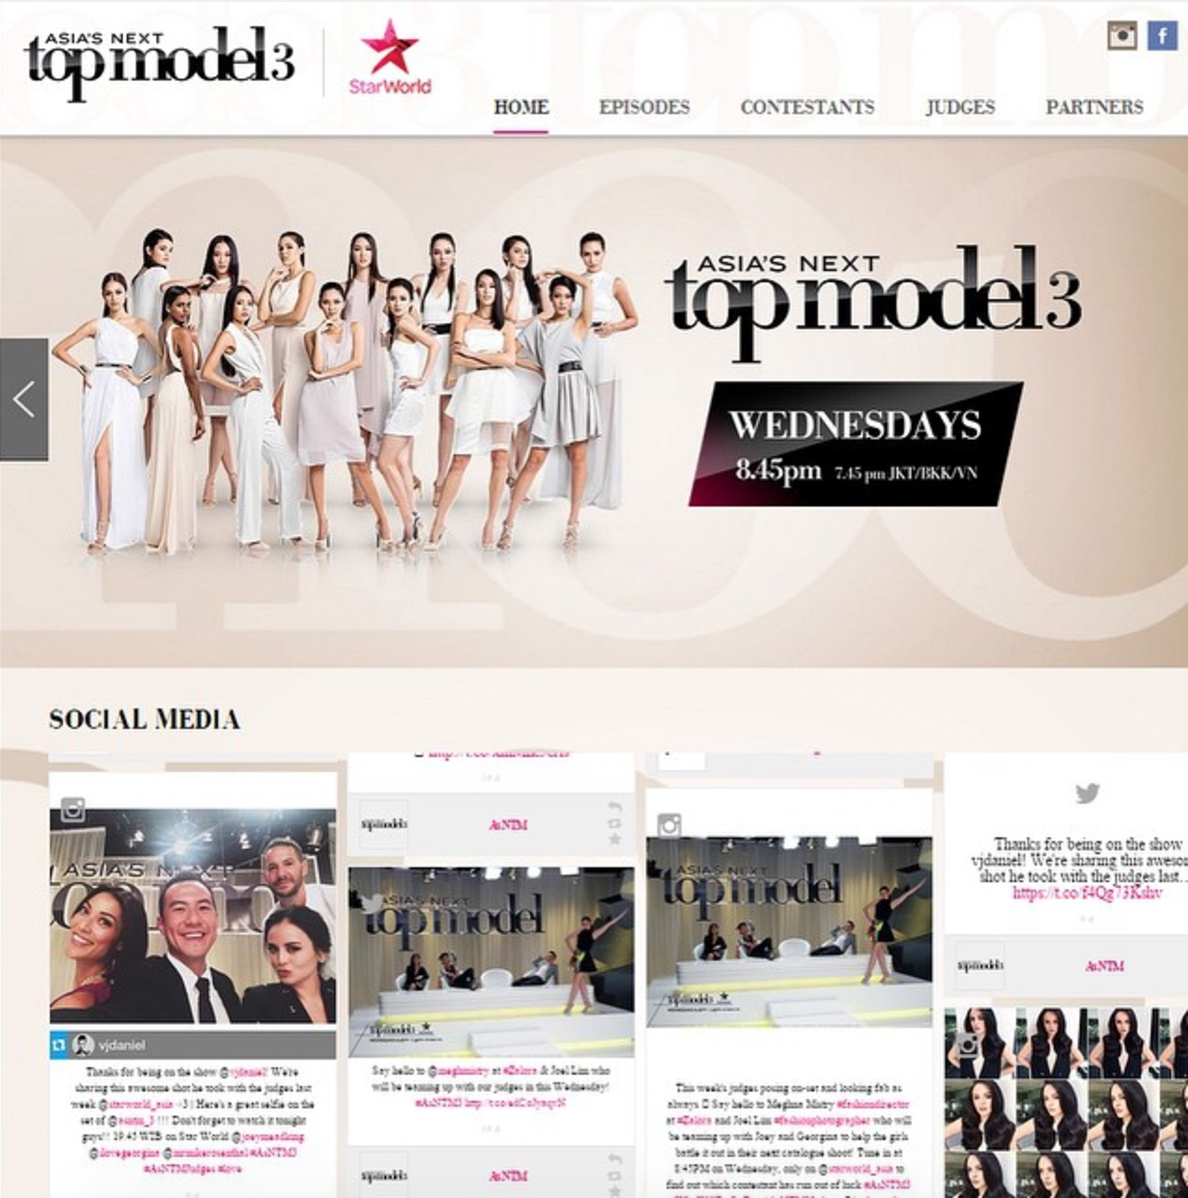 Dialogfeed has made a hashtag campaign for the social wall of Asia's Next Top Model